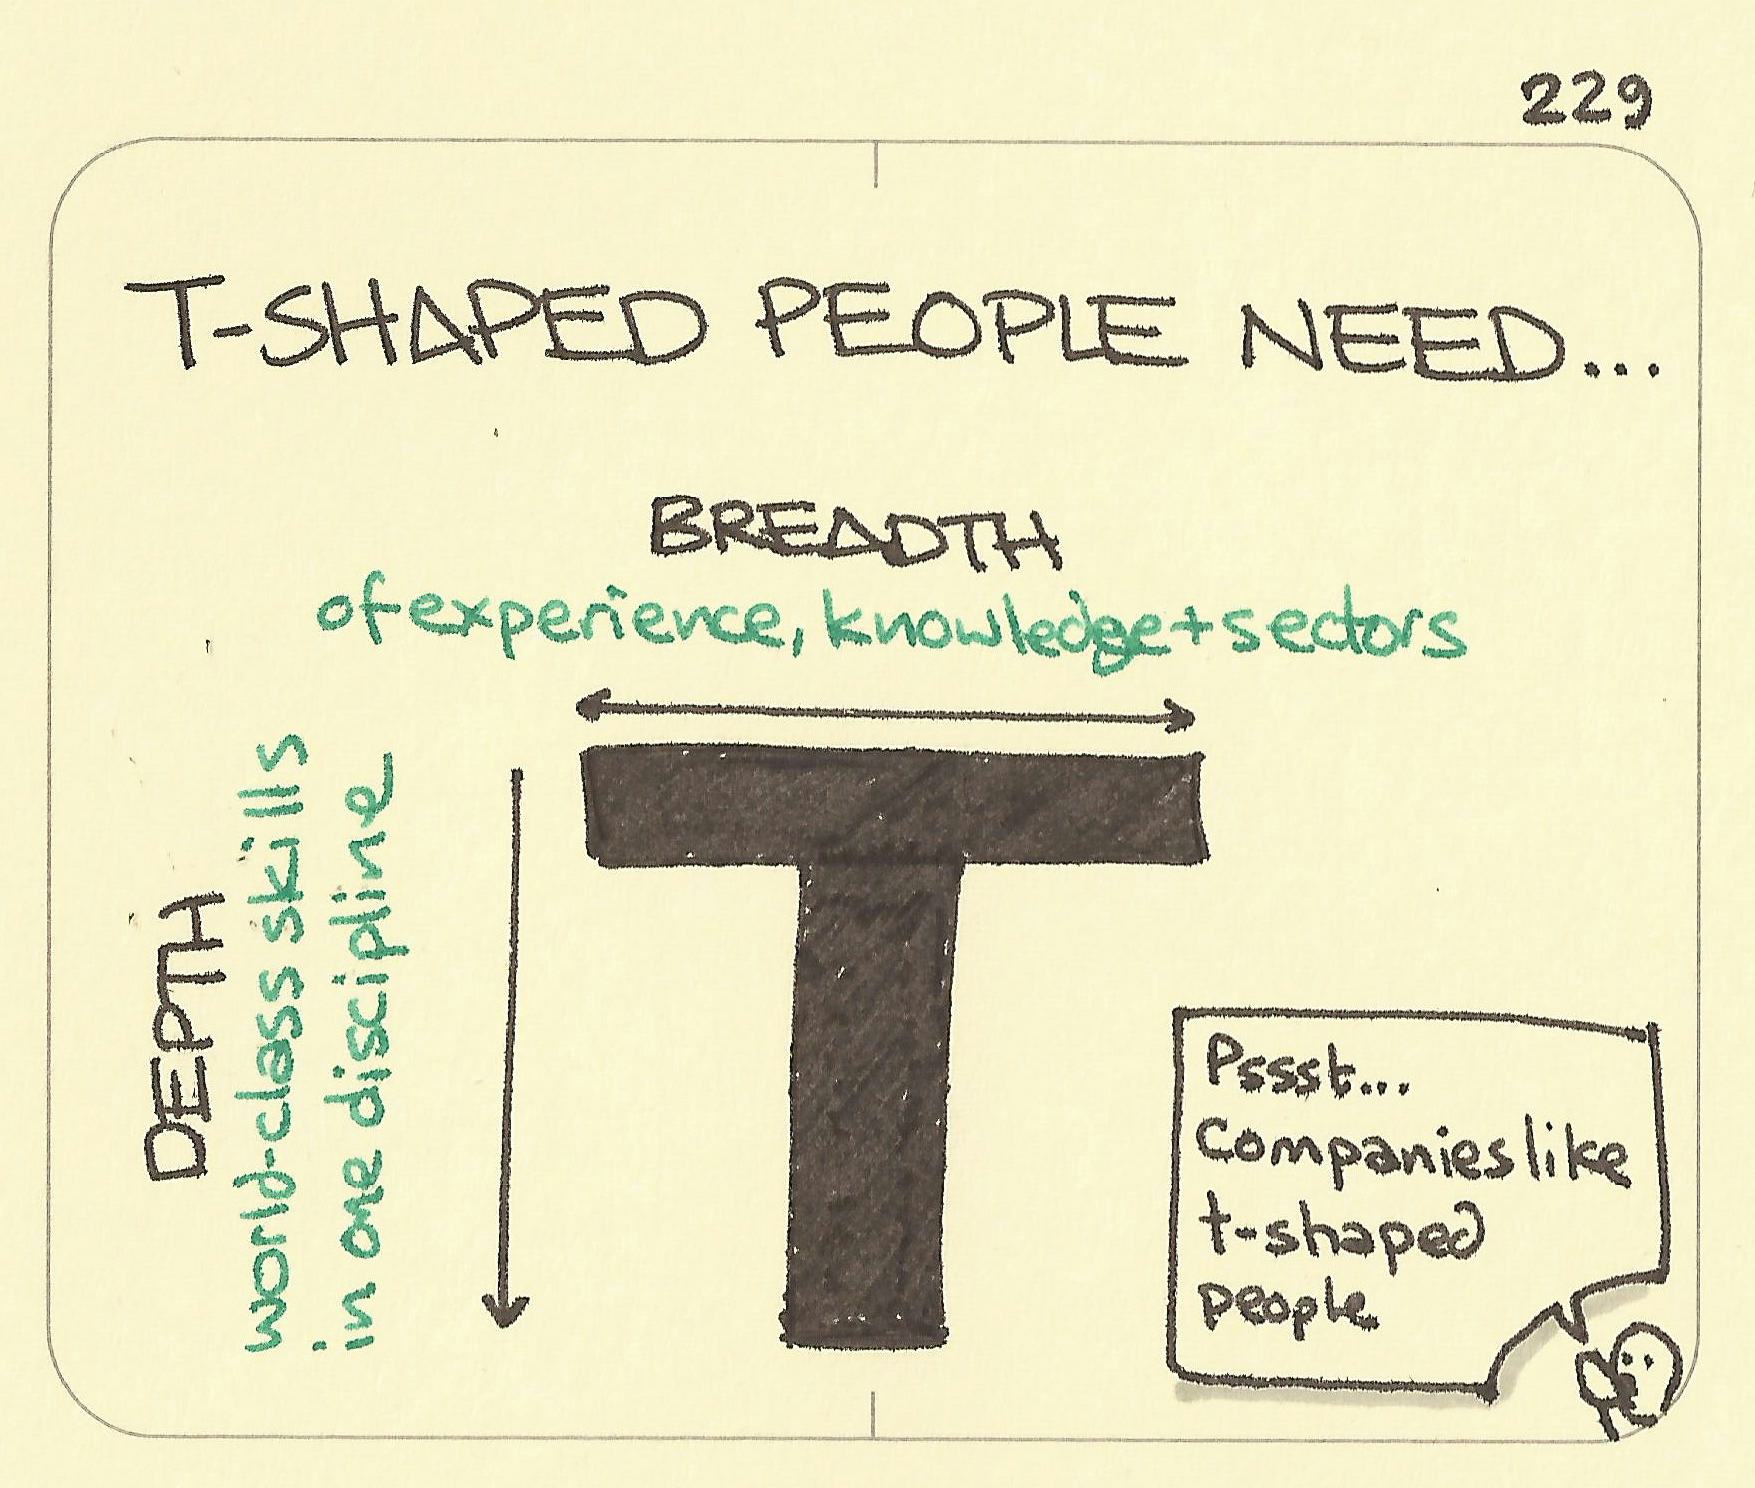 T-shaped people need breadth and depth - Sketchplanations